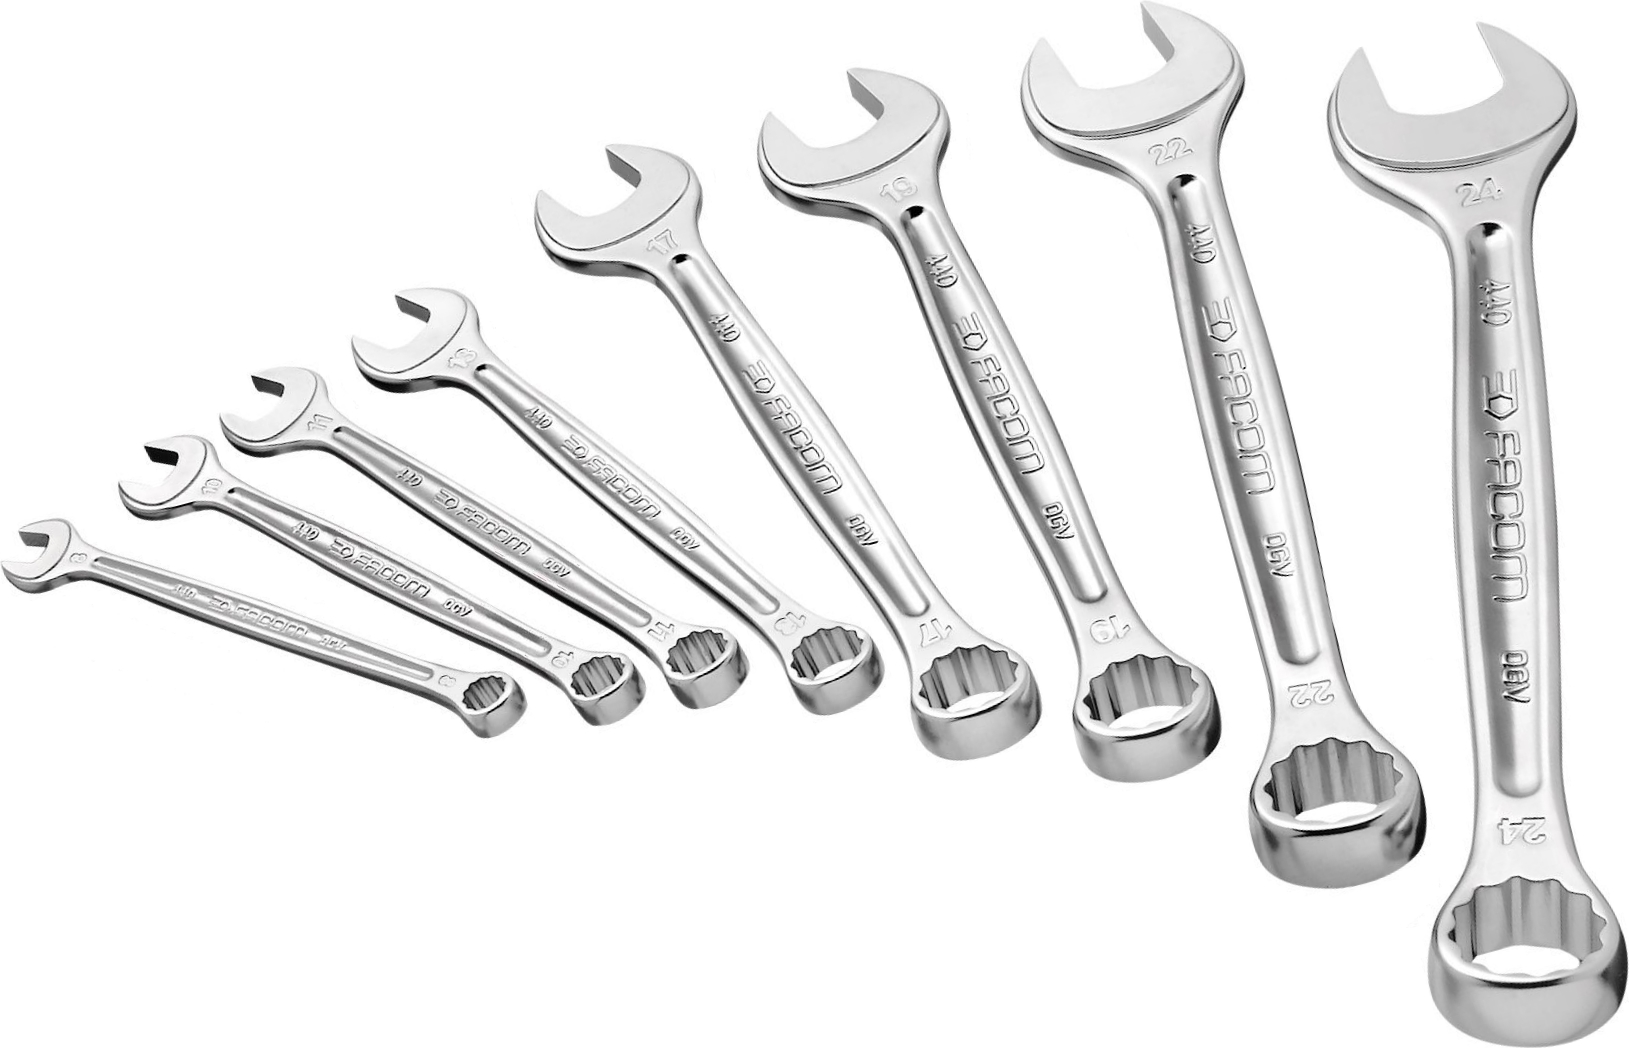 Britool expert by Facom combination wrench spanner 34mm E110101 